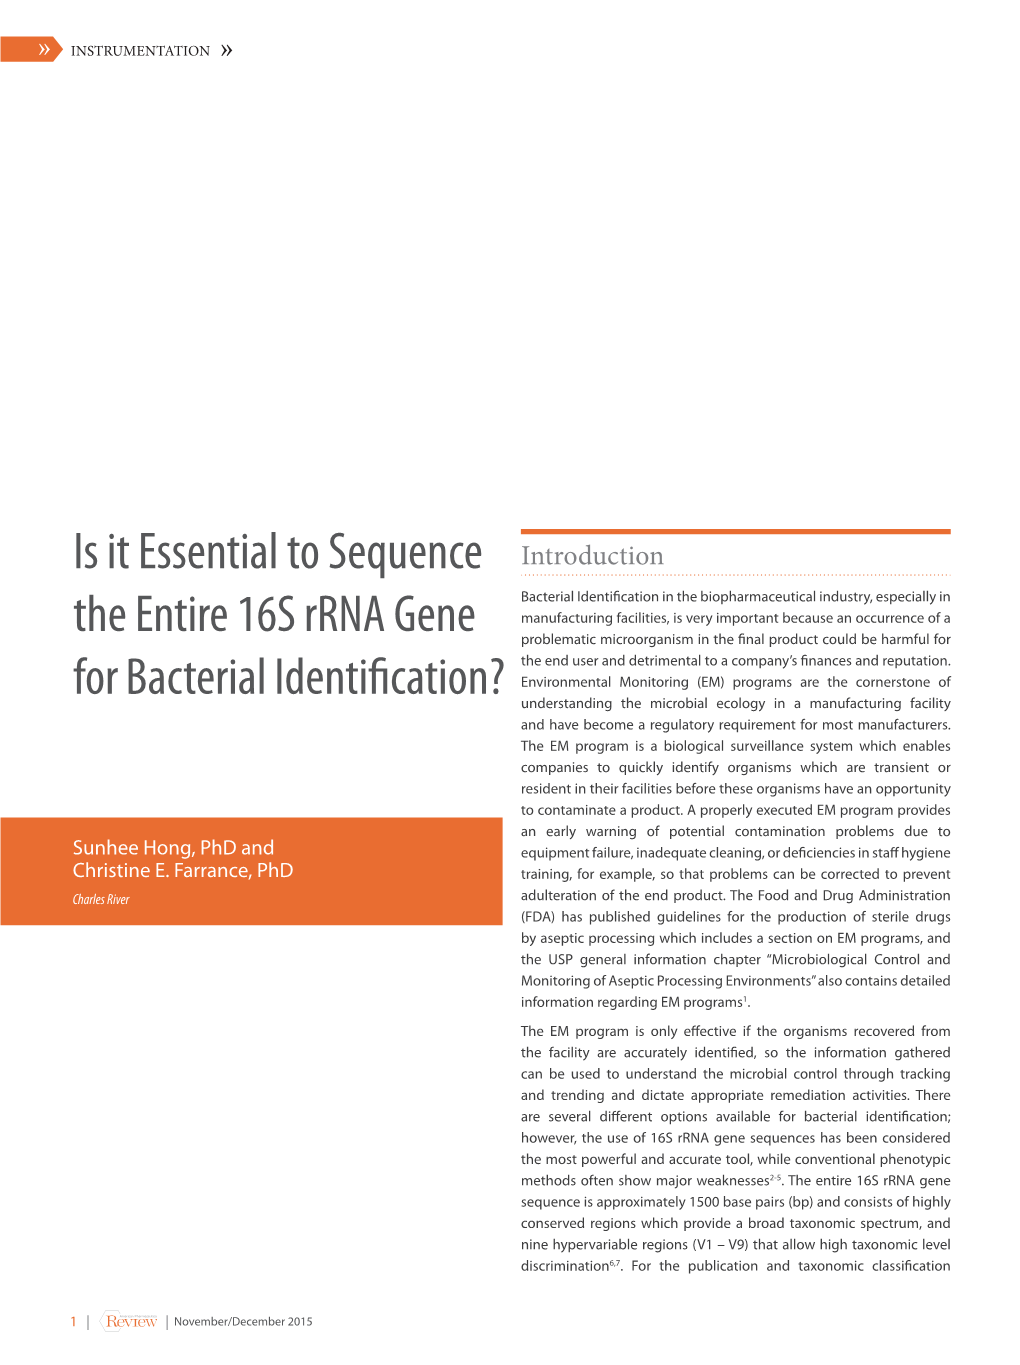 Is It Essential to Sequence the Entire 16S Rrna Gene for Bacterial